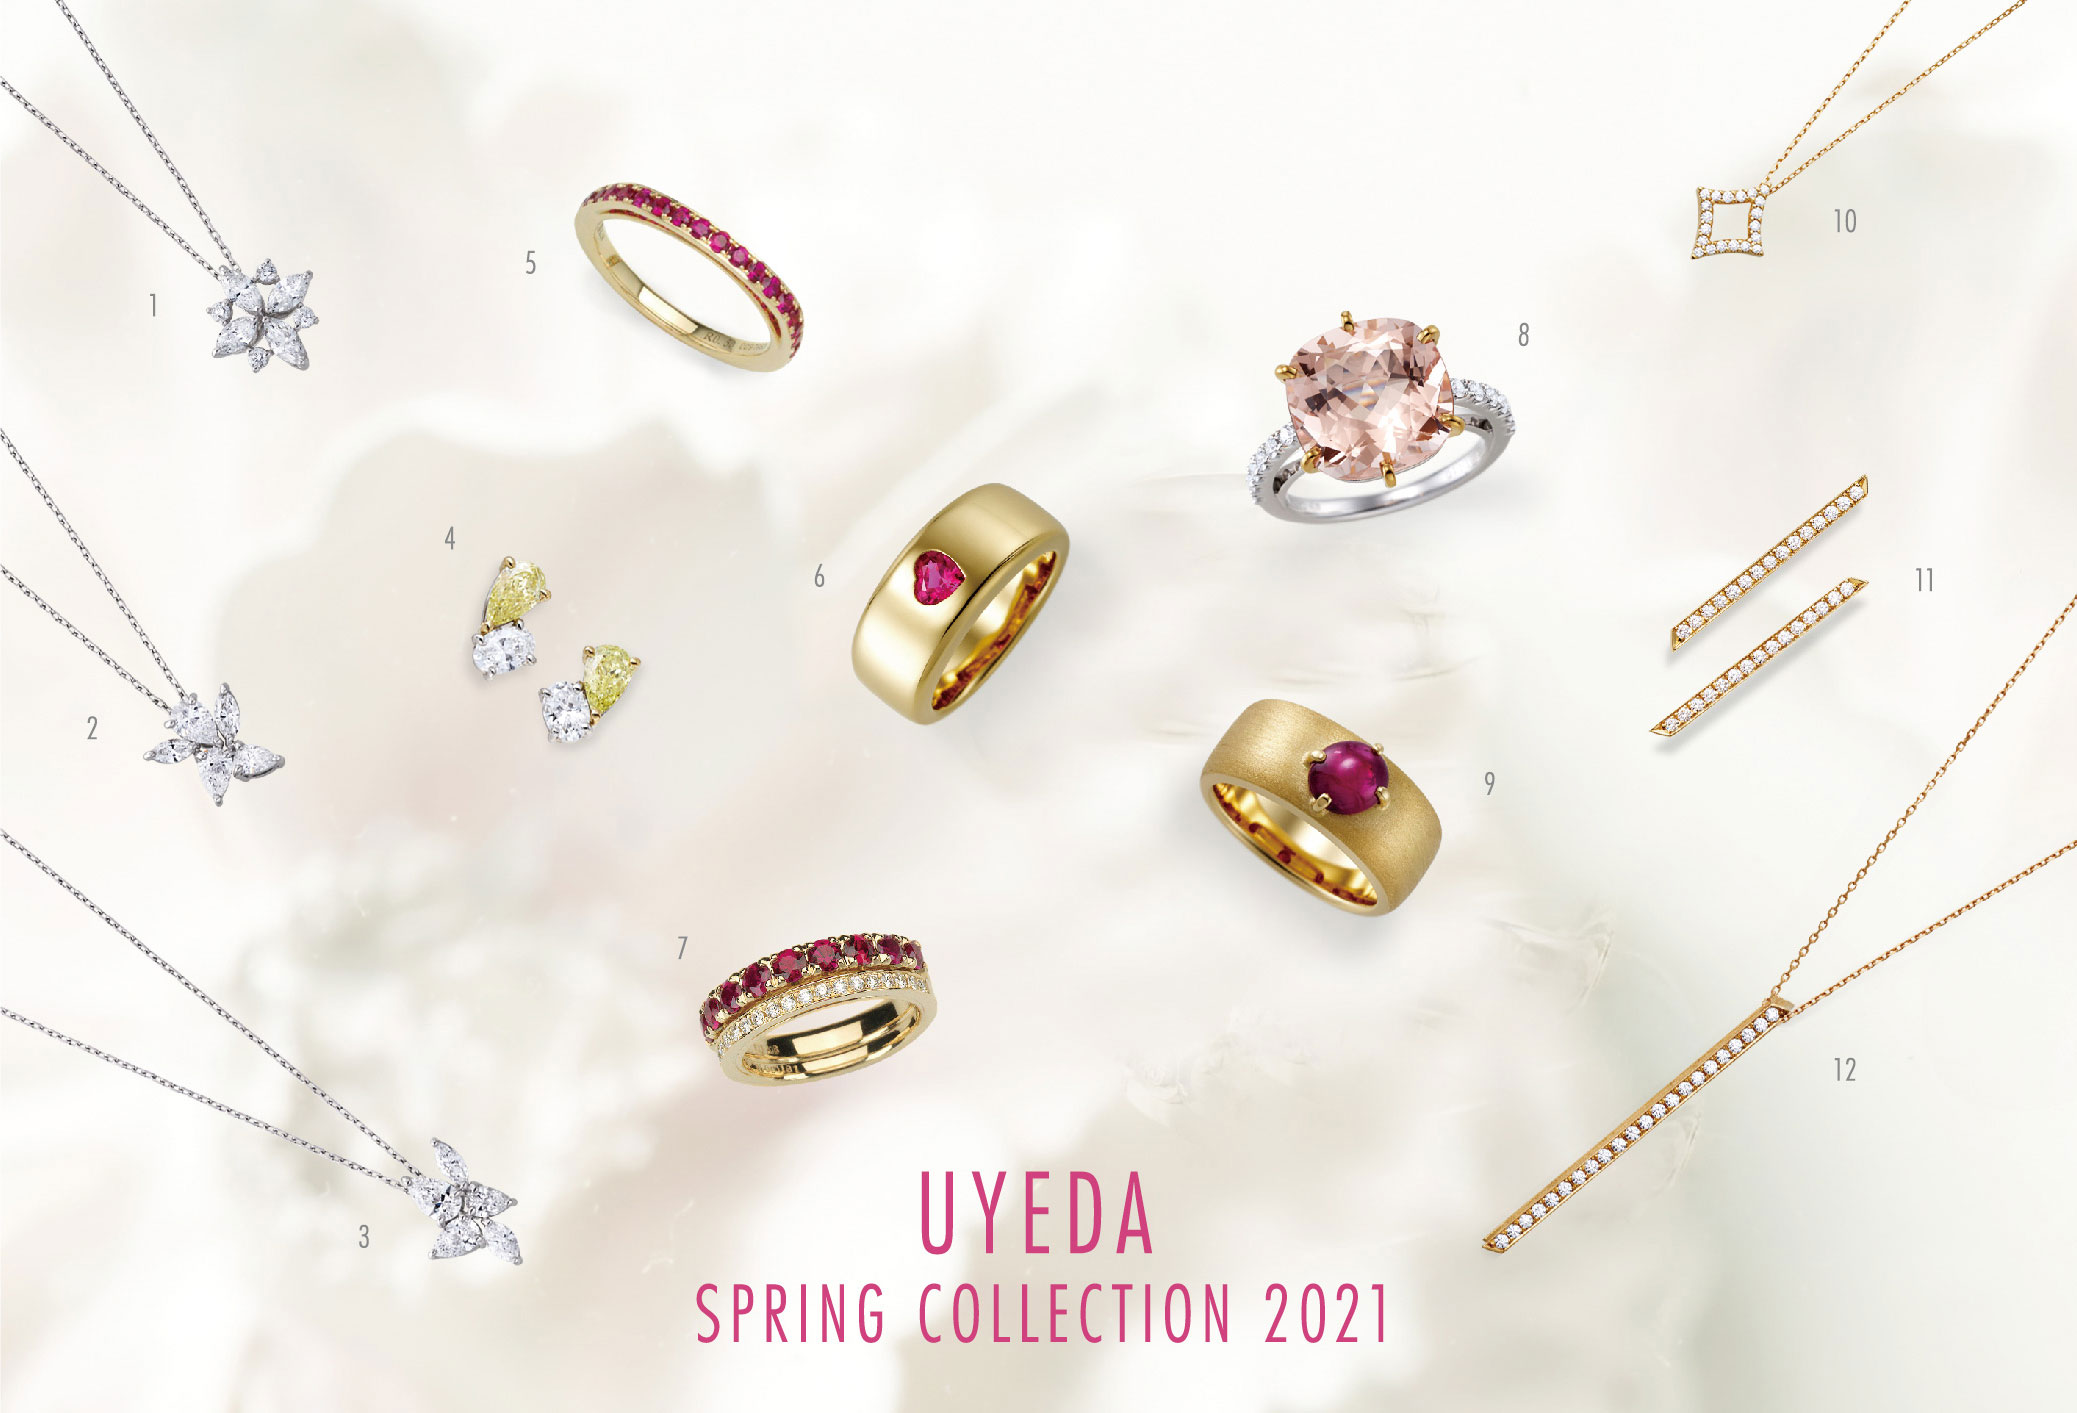 UYEDA SPRING COLLECTION 2021